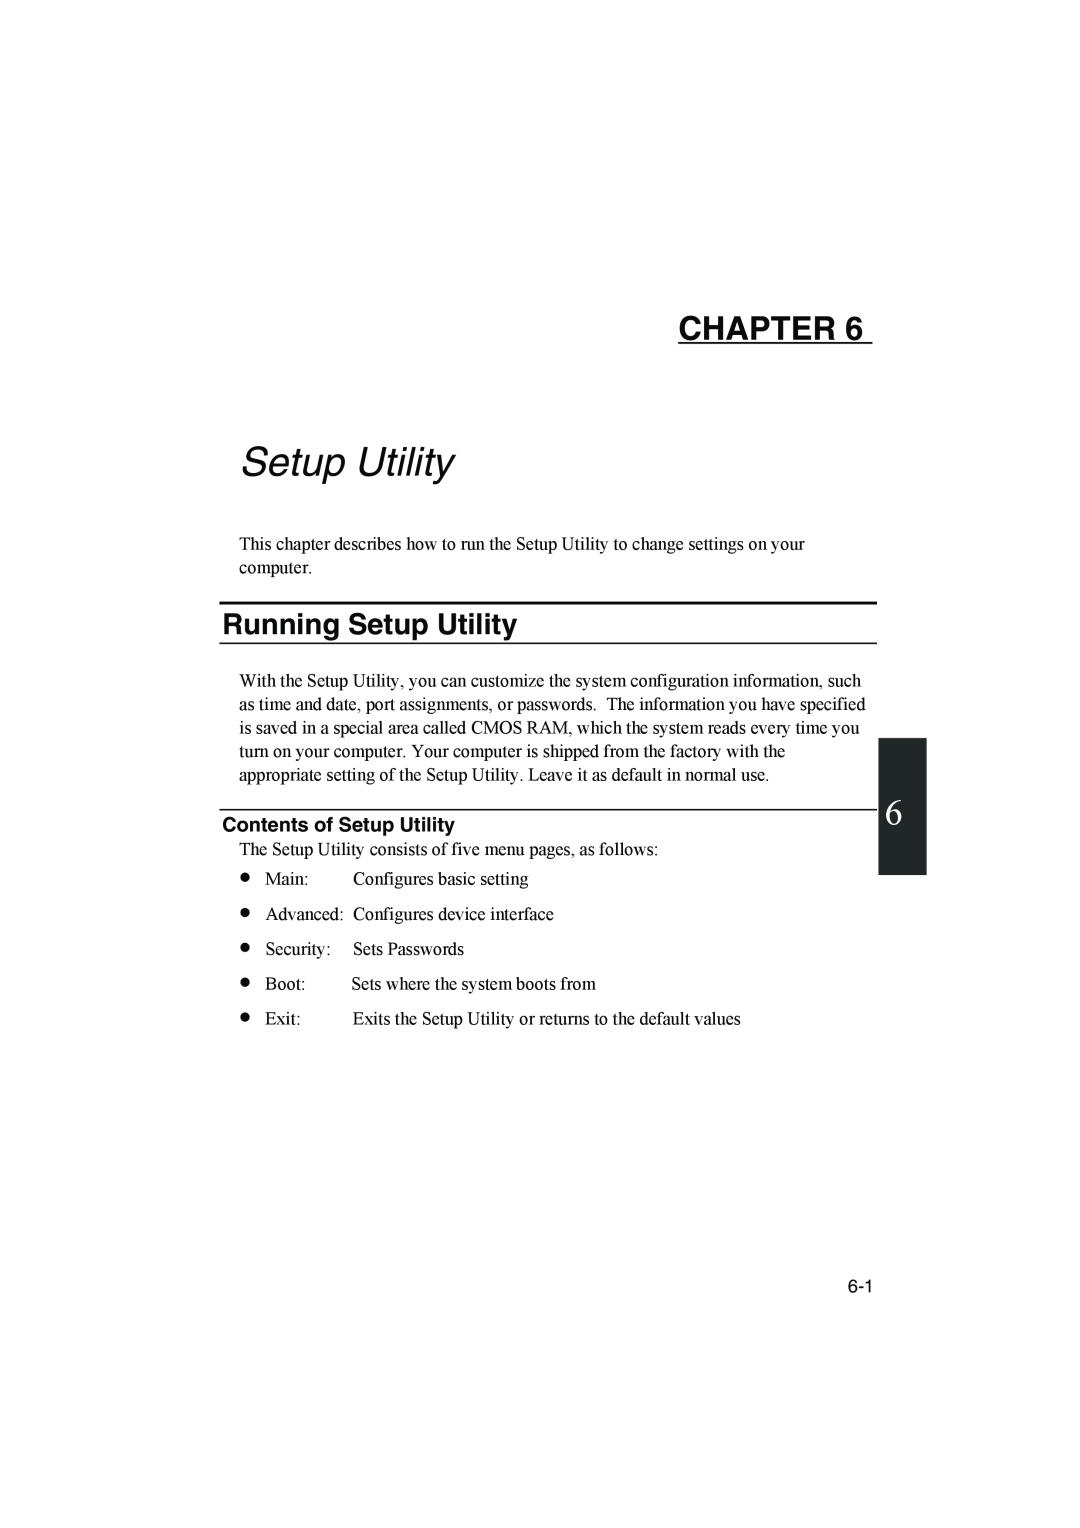 Sharp PC-MM1 manual Running Setup Utility, Contents of Setup Utility, Chapter 